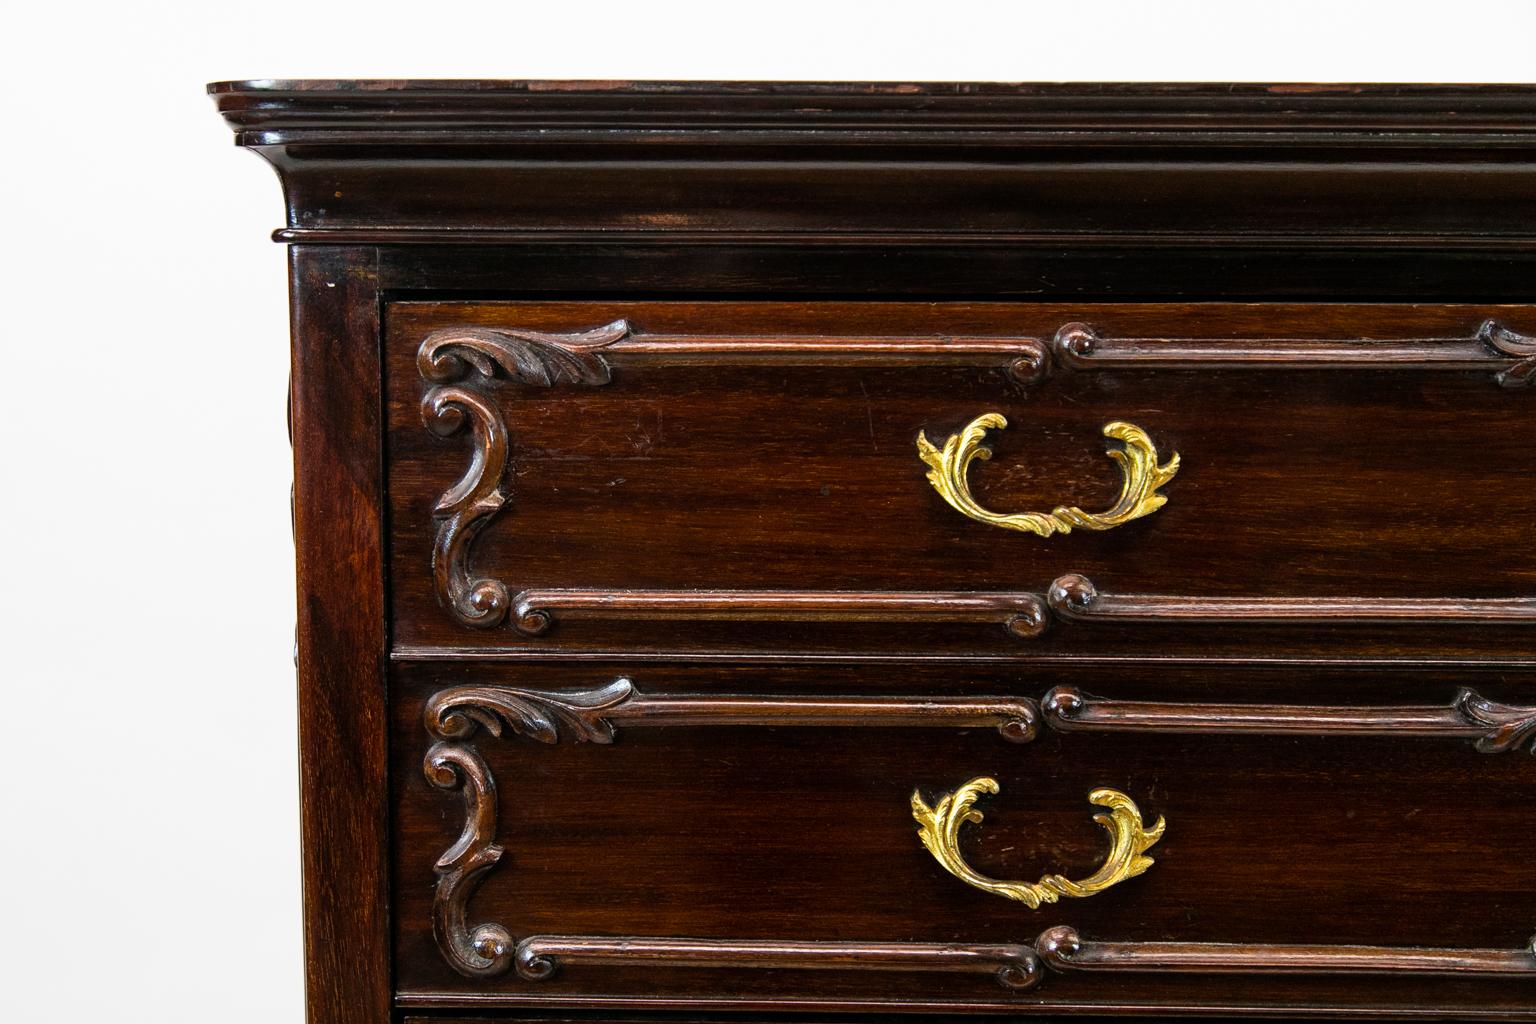 Mahogany music cabinet, the drawers lined with solid mahogany. There are carved moldings on the drawers and sides. The cabriole legs have acanthus leaf carvings terminating in French scrolled feet. The drawer fronts fold down to access music scores.